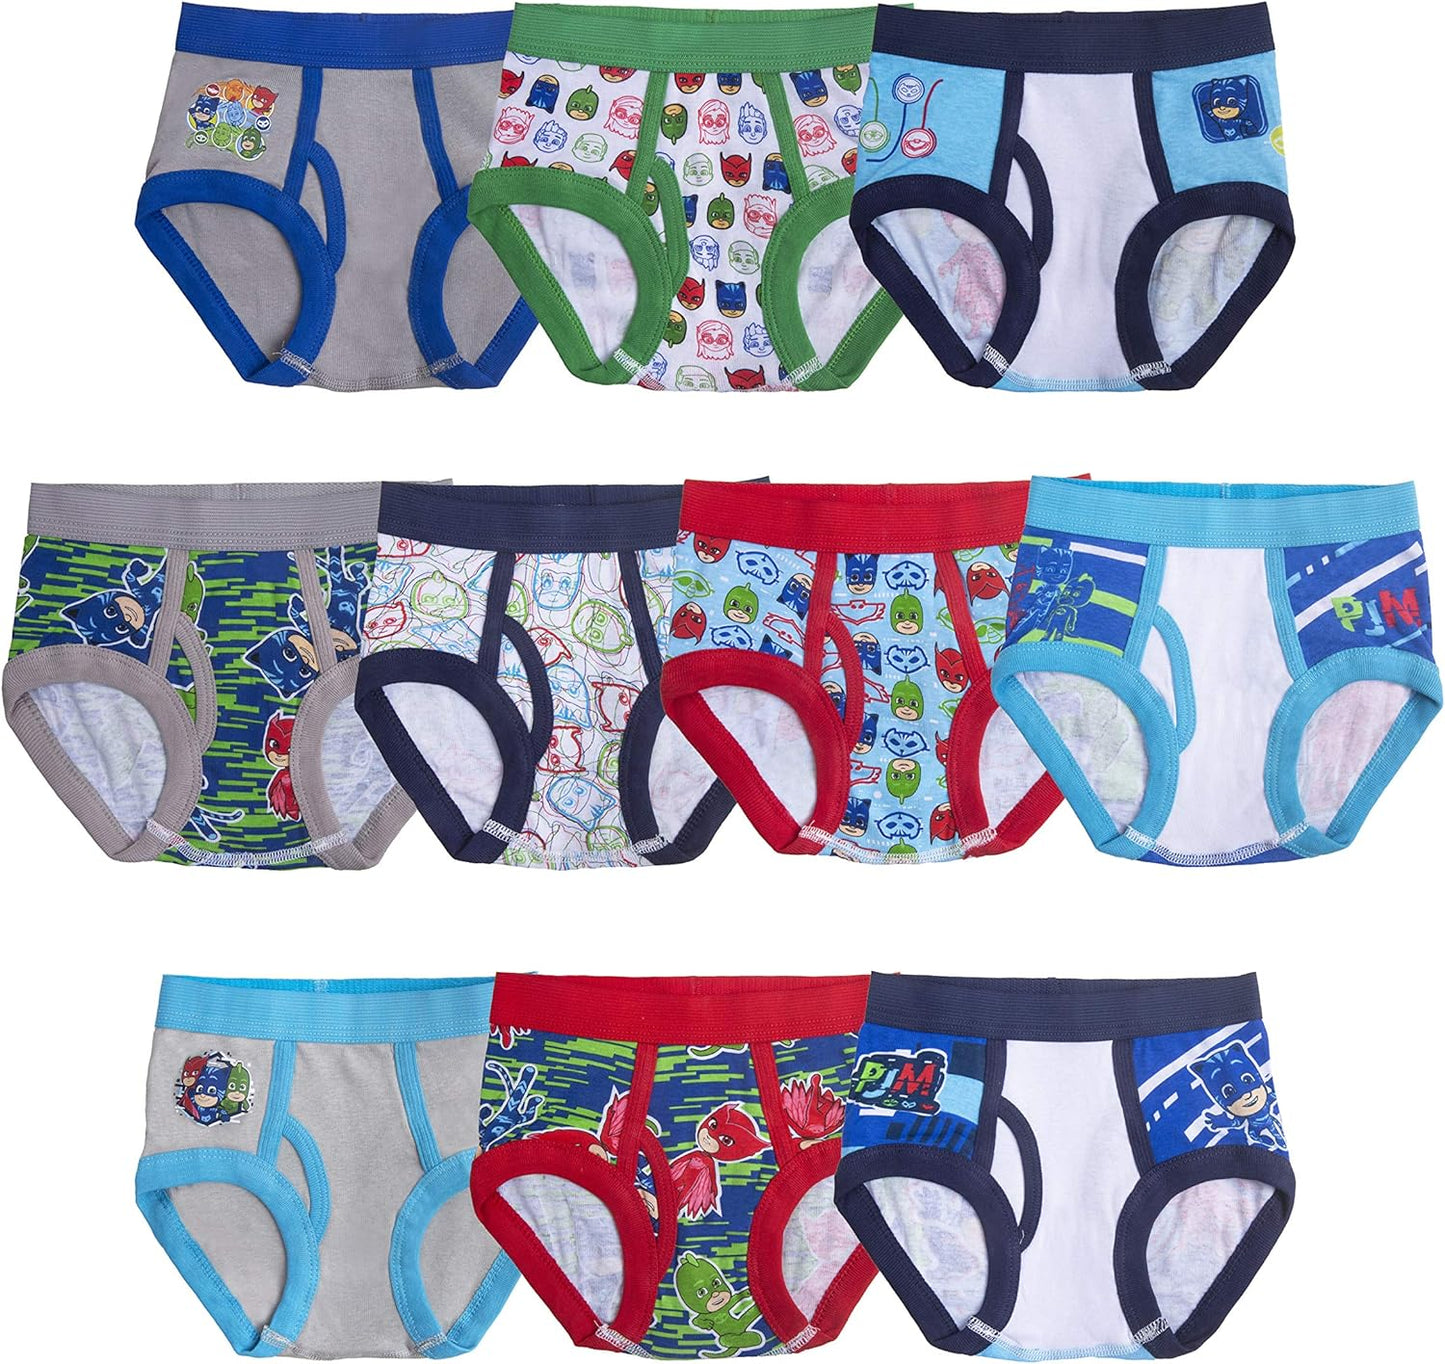 PJ Masks Boys' 100% Combed Cotton Brief Multipacks with Catboy, Luna Girl, Owlette and More in Sizes 2/3t, 4t, 4, 6 and 8